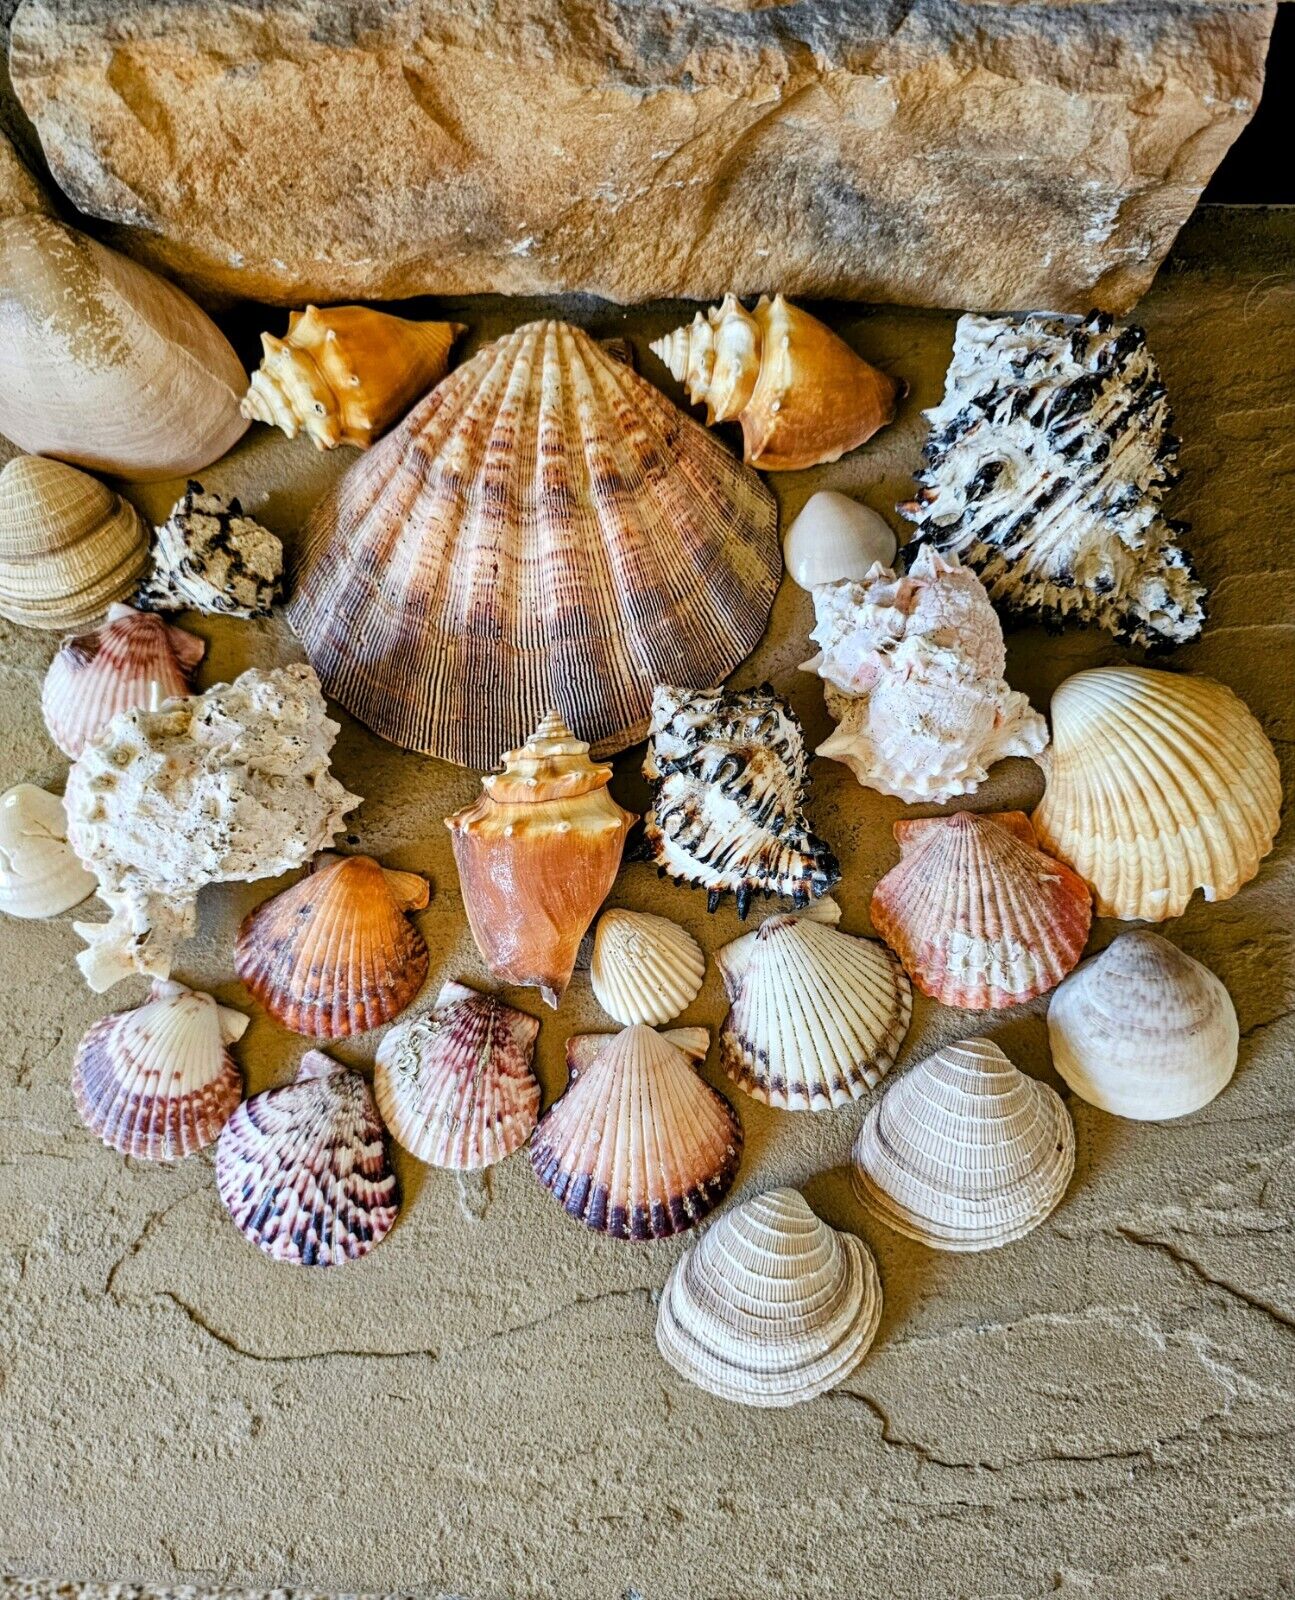 Large lot of 26 seashell - almost 3 pounds - Photos are actual shells you'd get